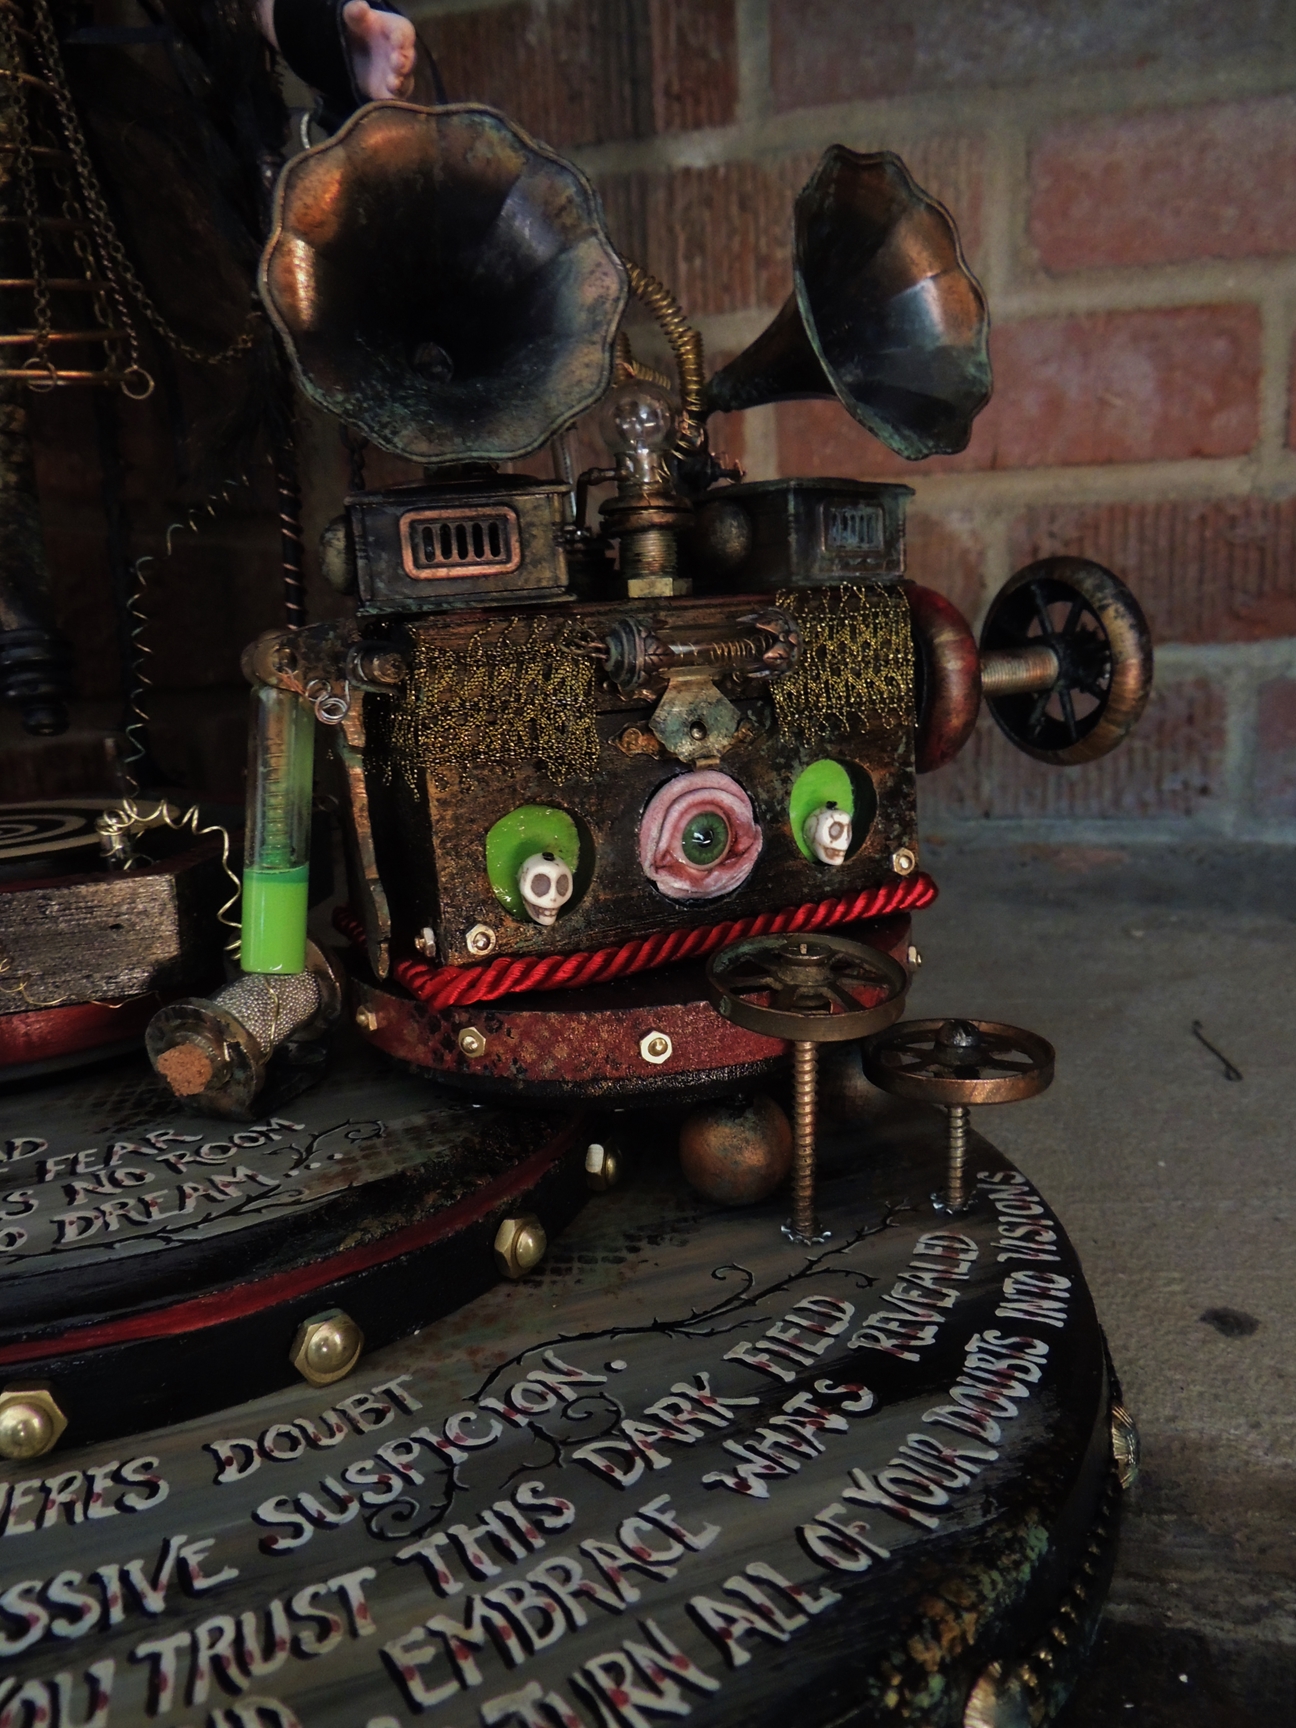 close-up of miniature phonograph steampunk dream machine contraption and painted poem lettering on wooden platform